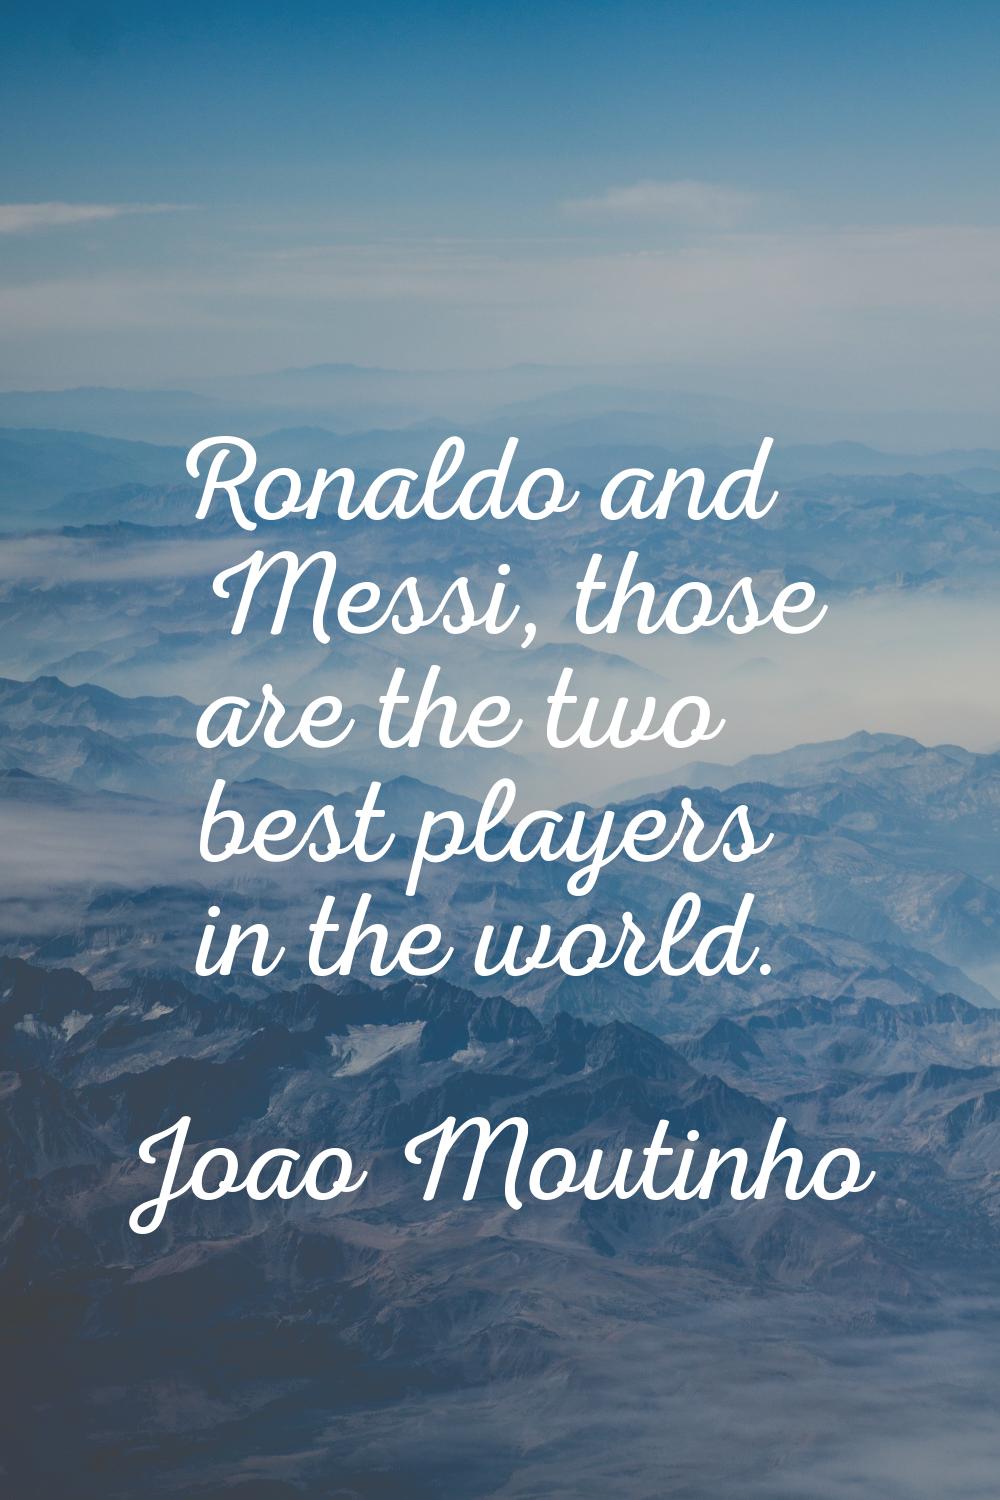 Ronaldo and Messi, those are the two best players in the world.